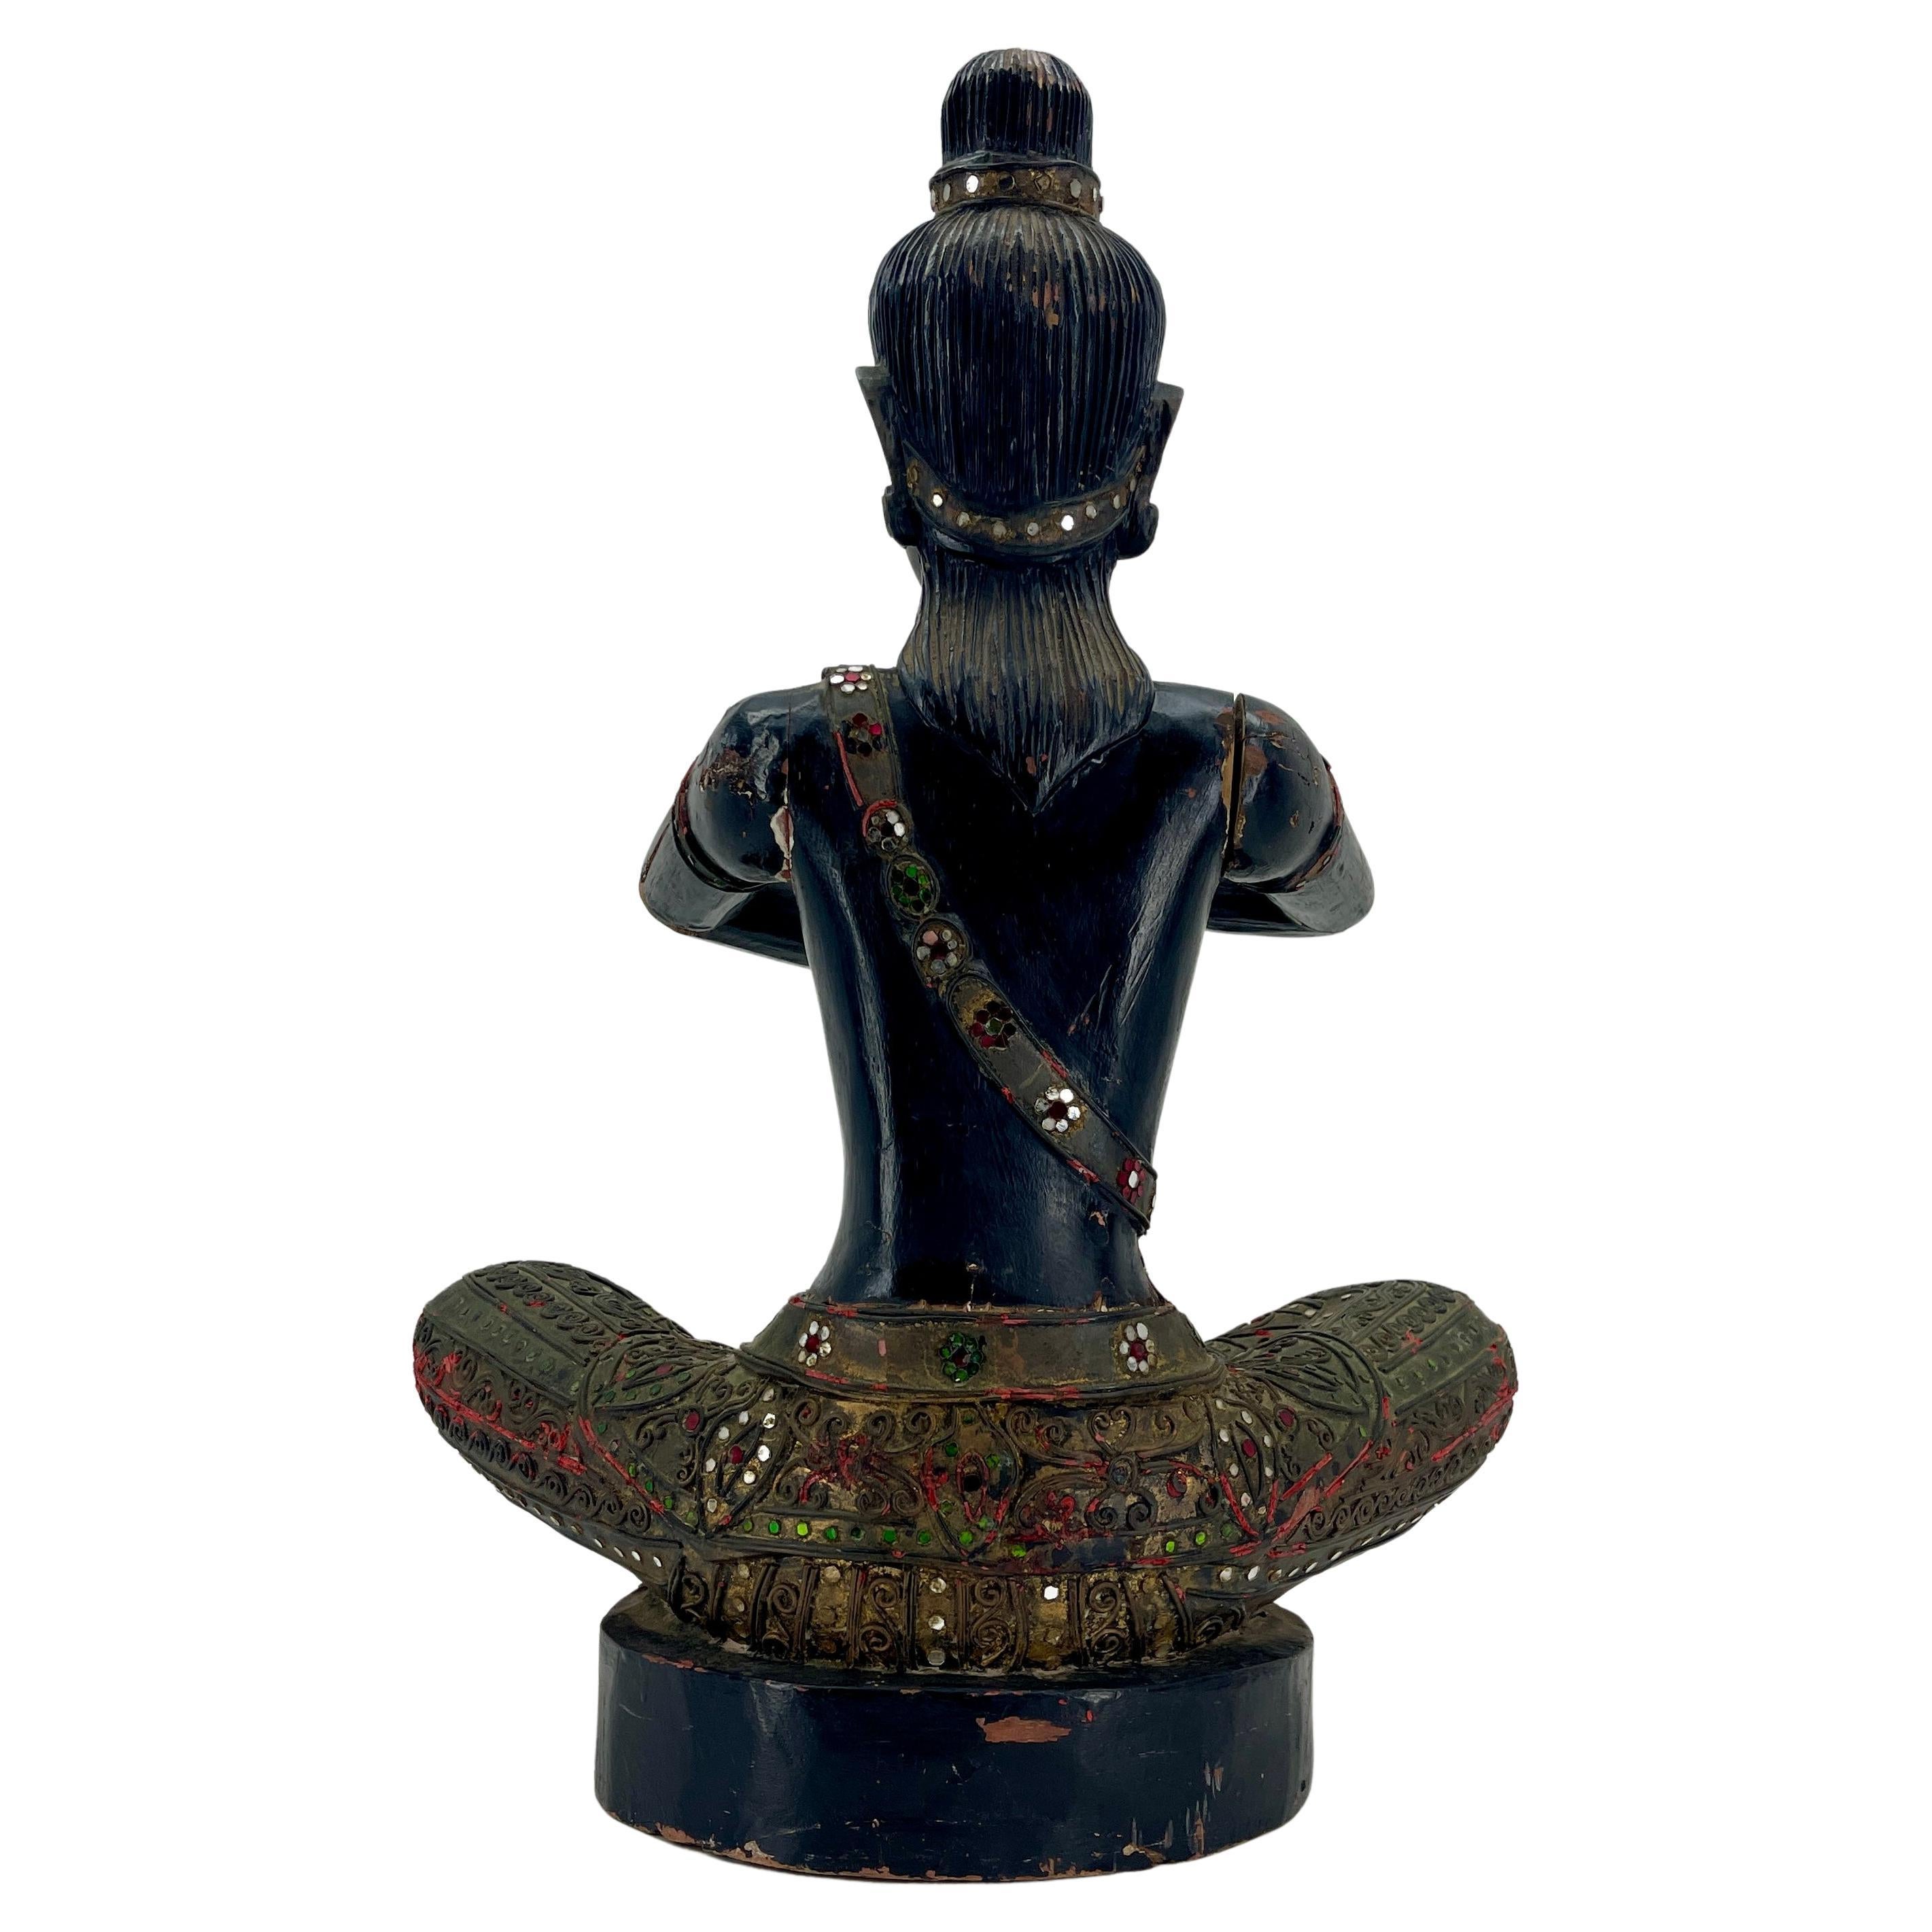 Sitting black painted sitting Buddha sculpture, Cambodian, circa 1920s
The statue is decorated with multiple red and green colored mirrored glass pieces. Several area around the chest was original gilded.